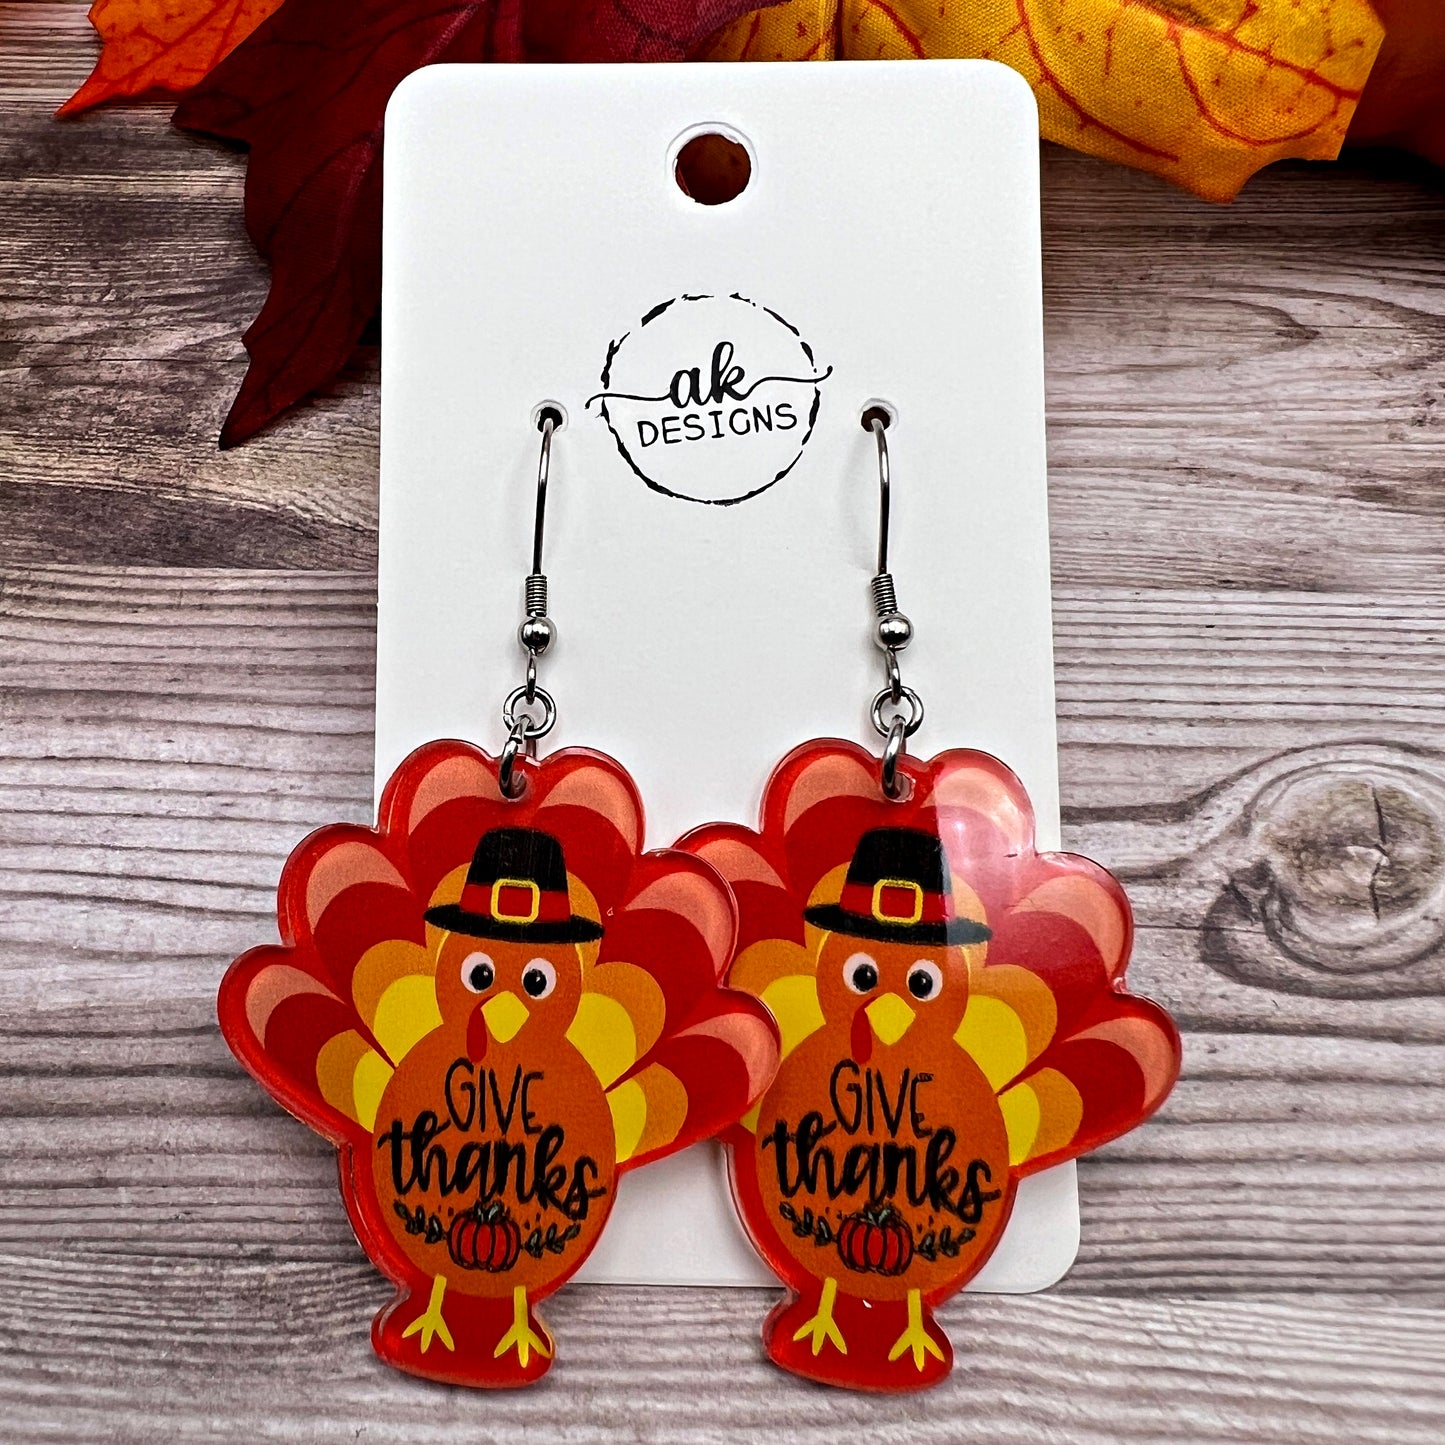 Thanksgiving Turkey Acrylic Stainless Steel Dangle Earrings, Give Thanks, Gobble gobble, Hypoallergenic Holiday Gift